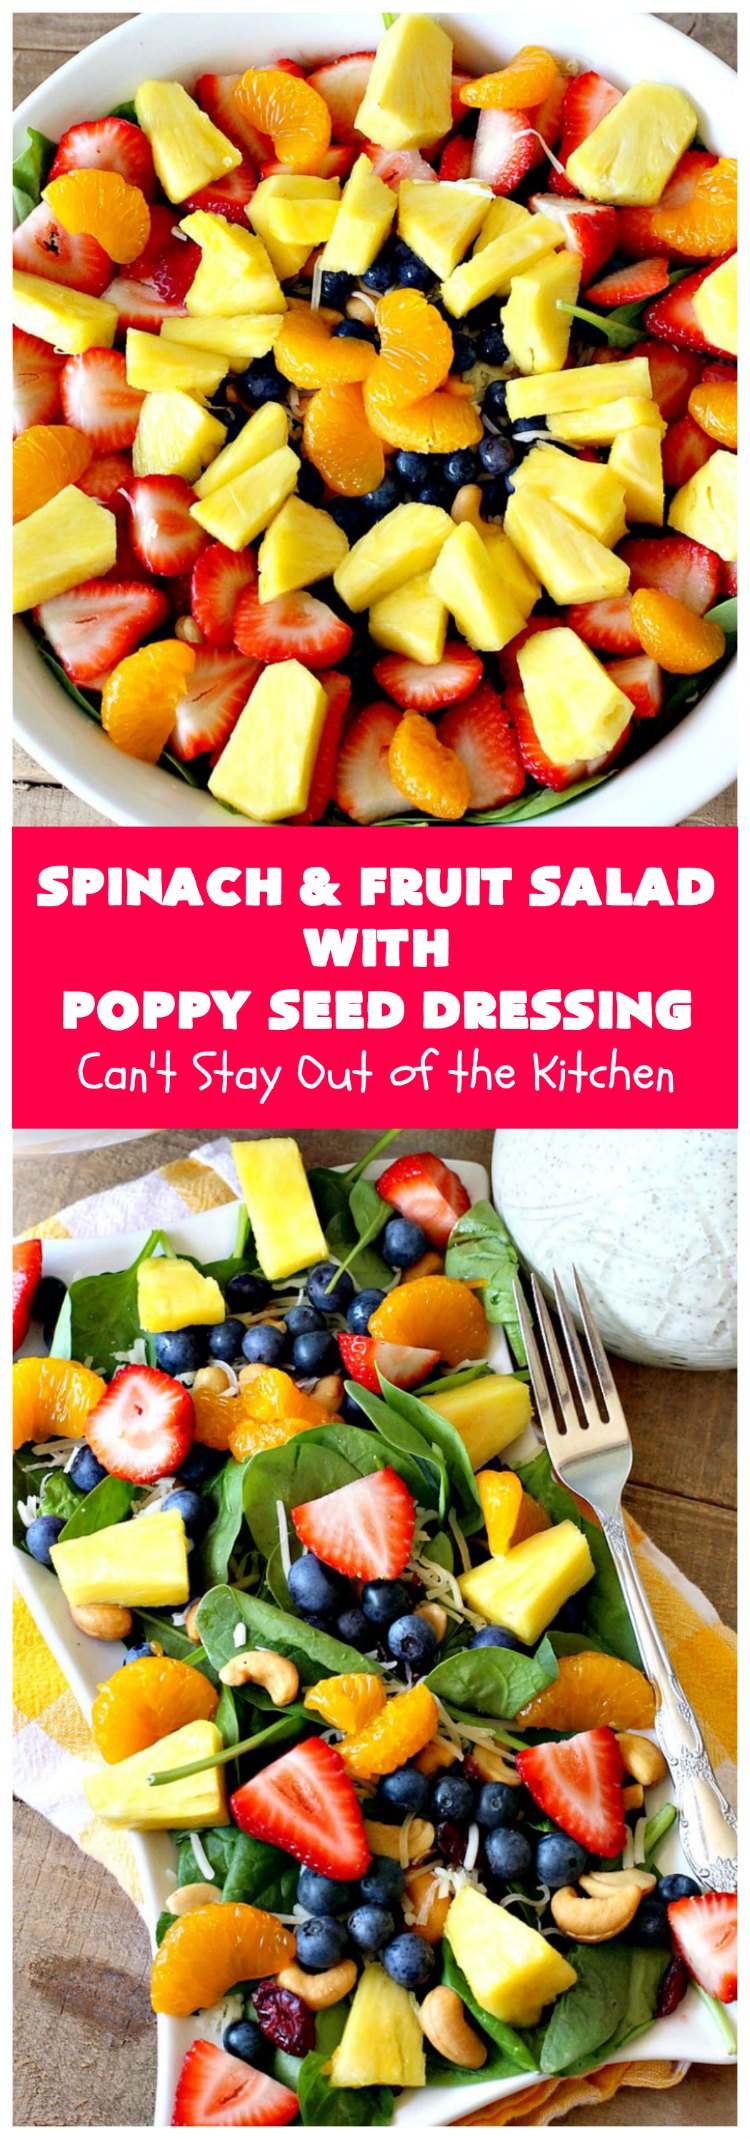 Spinach and Fruit Salad with Poppy Seed Dressing | Can't Stay Out of the Kitchen